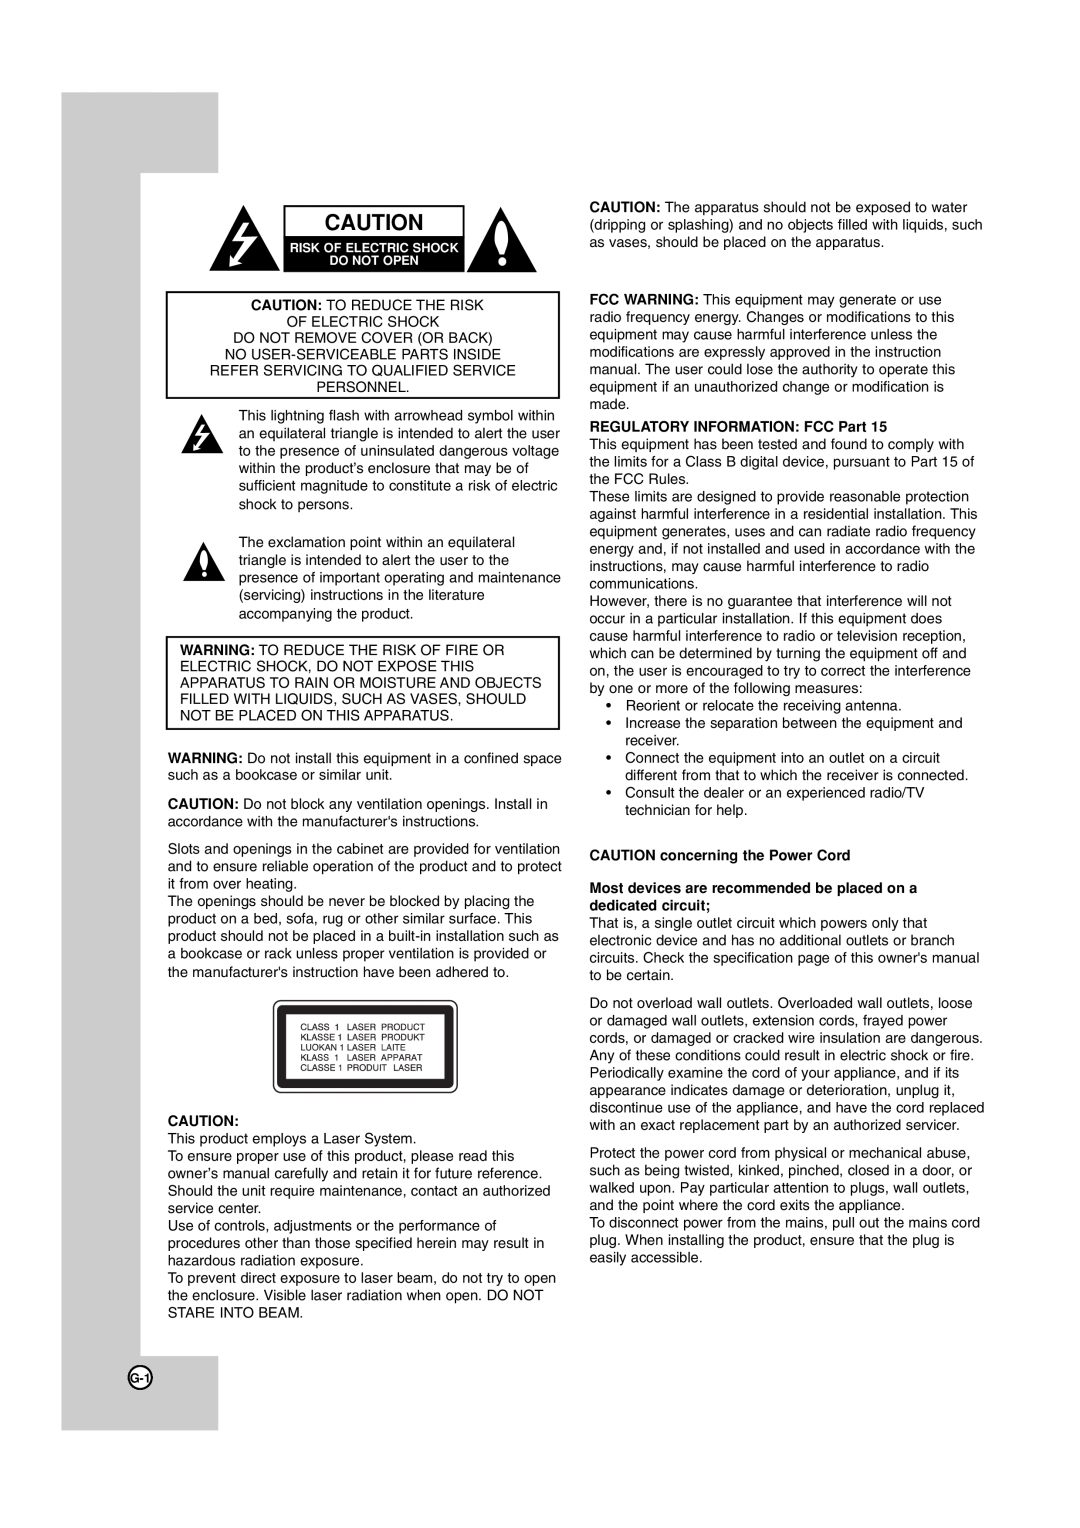 JVC TH-G40 manual REGULATORY INFORMATION FCC Part, CAUTION concerning the Power Cord 